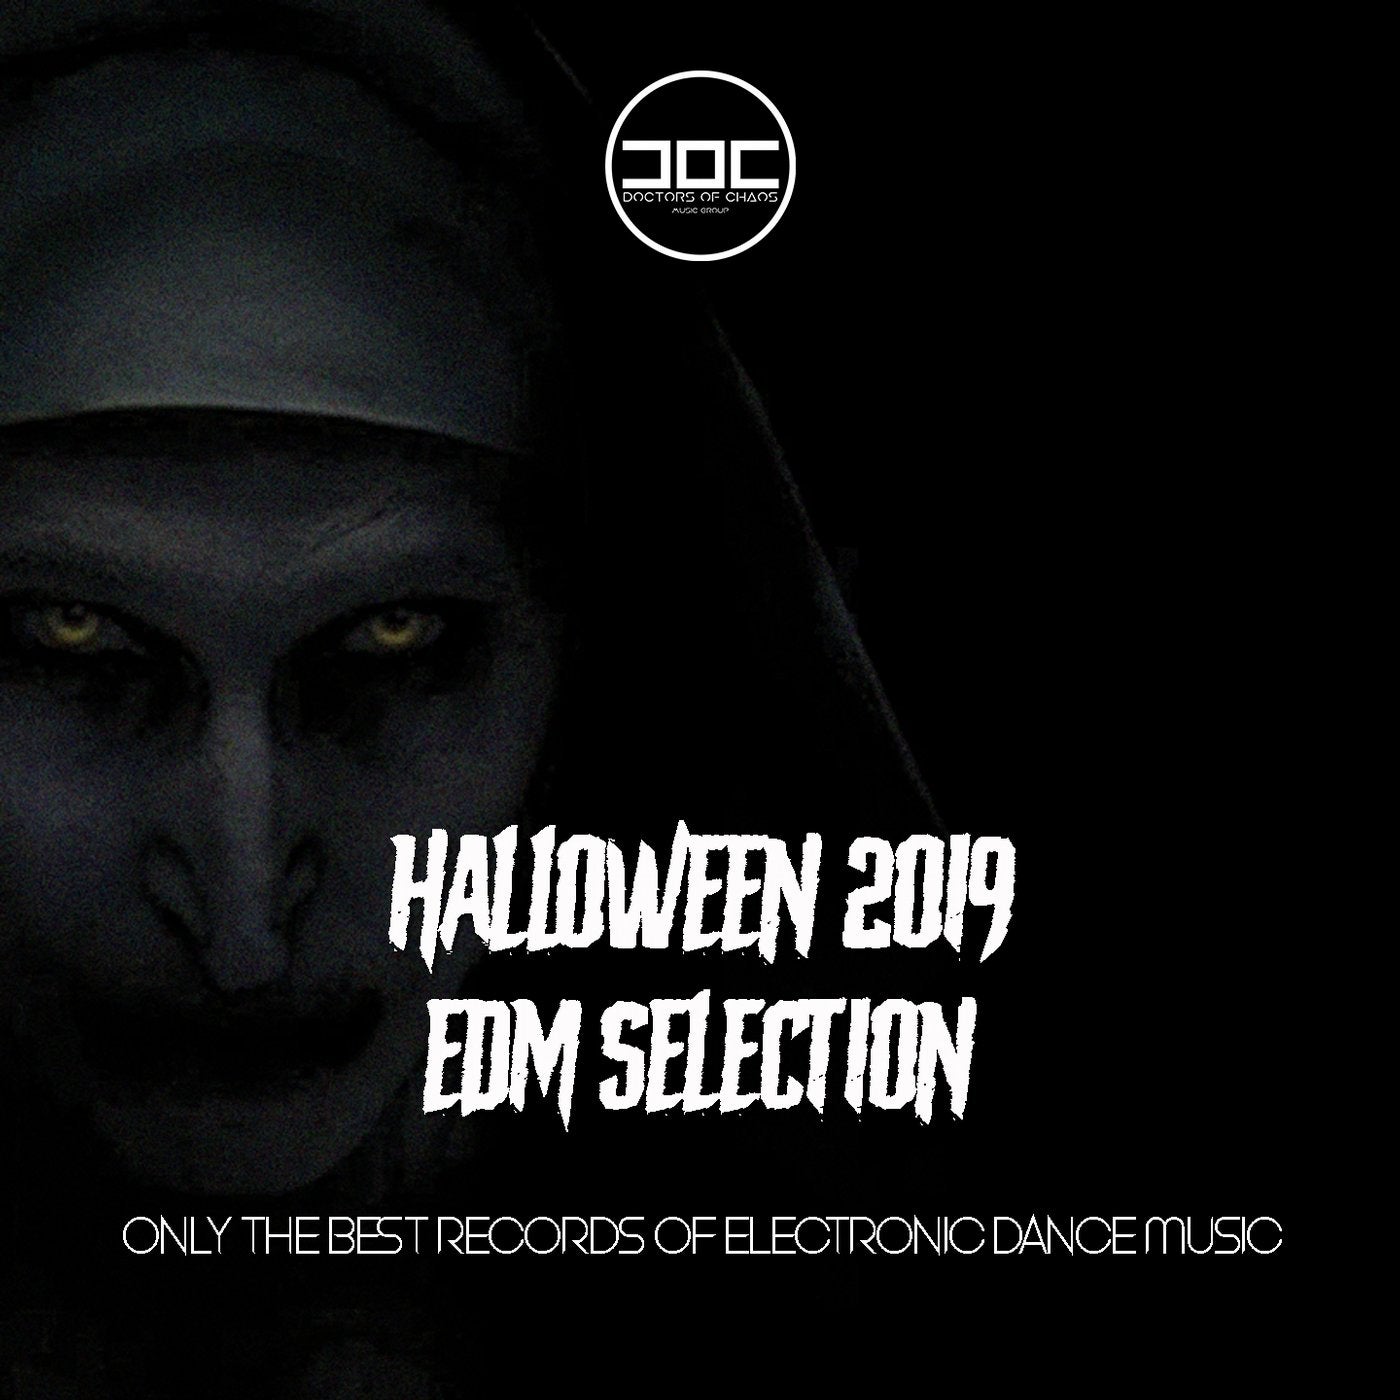 Halloween 2019 Edm Selection (Only the Best Records of Electronic Dance Music)